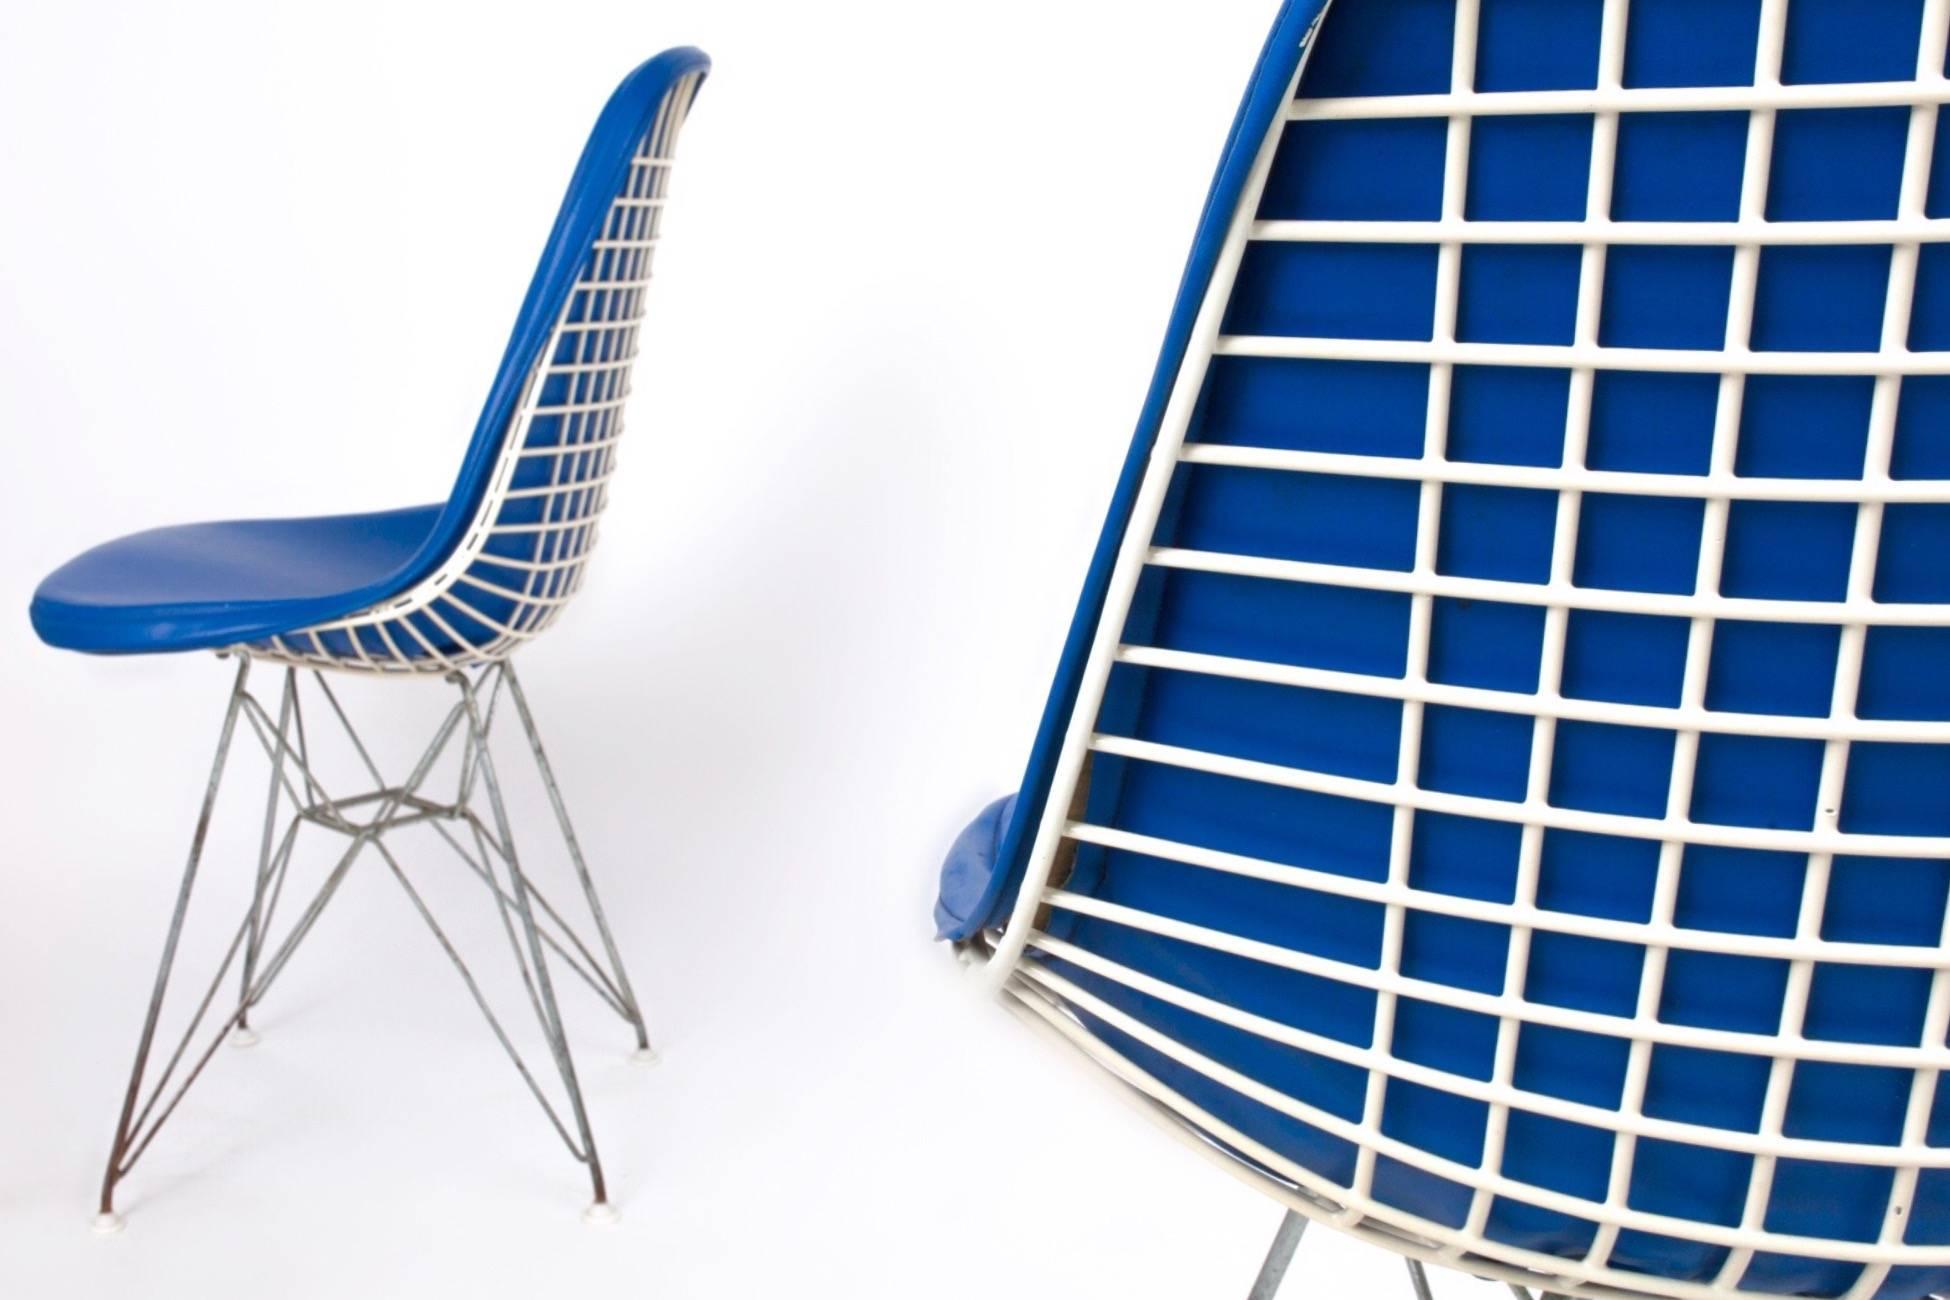 Mid-Century Modern Original Set of 4 Eames DKR-1 Dining Chairs in Blue Vinyl and White Steel, 1951 For Sale